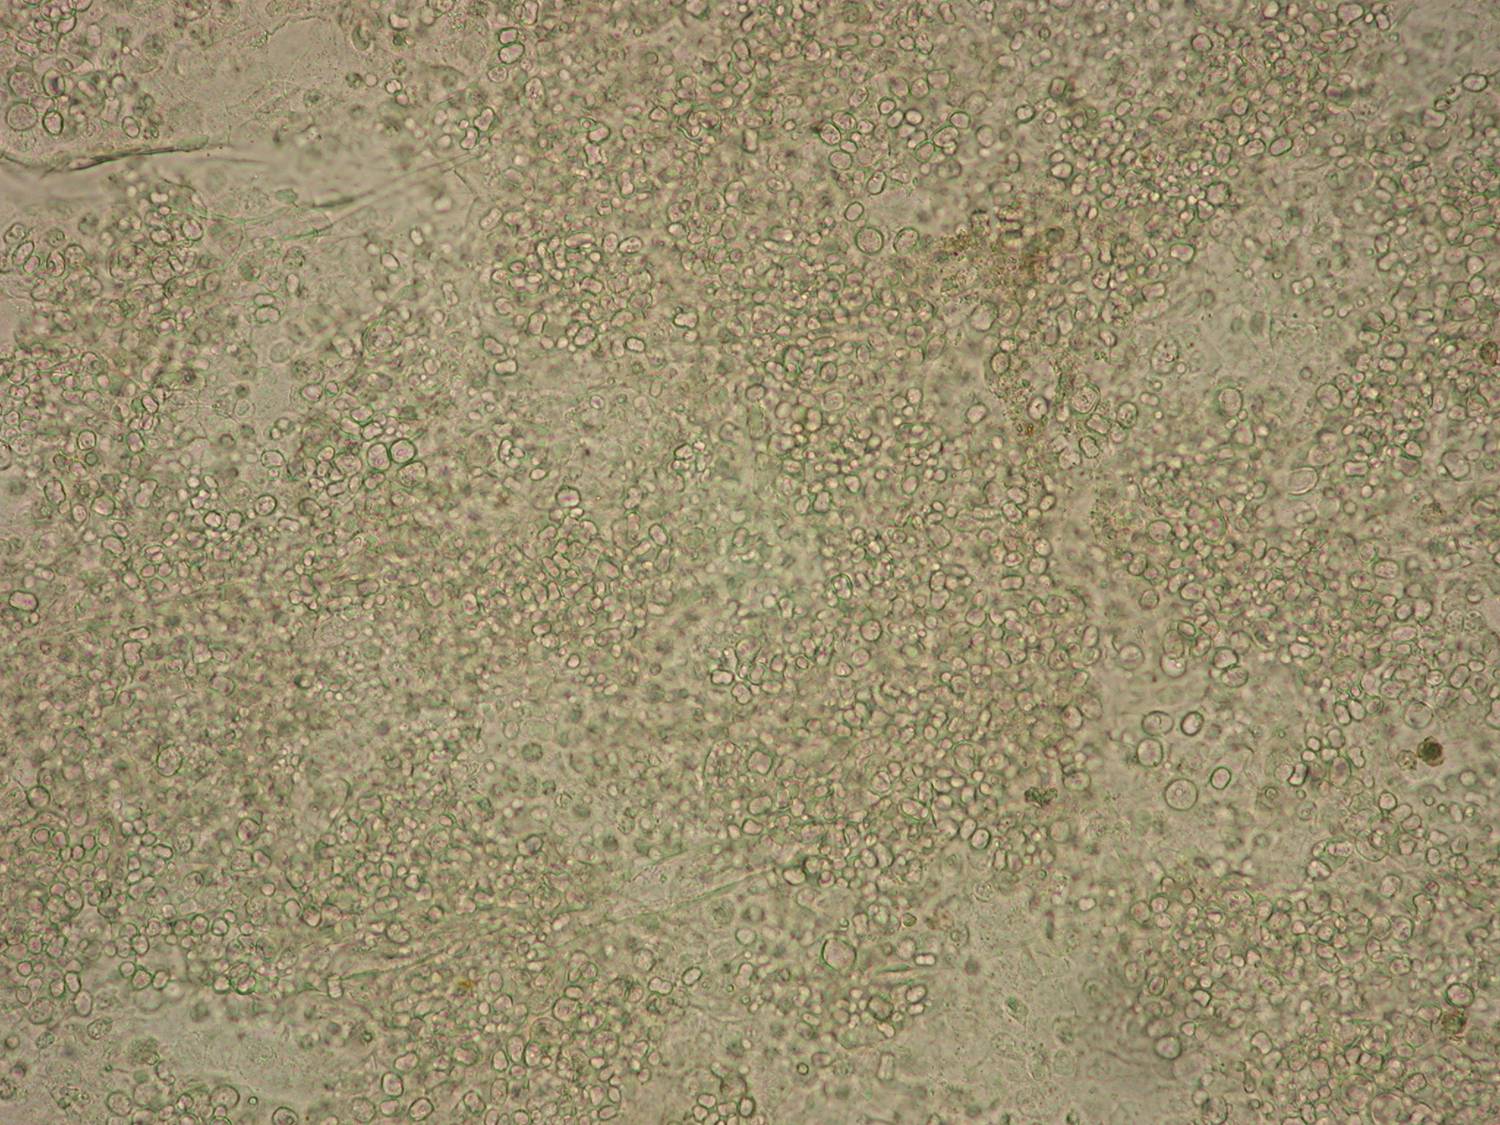 beige, microscopic view of frog skin infected with Bd pathogen